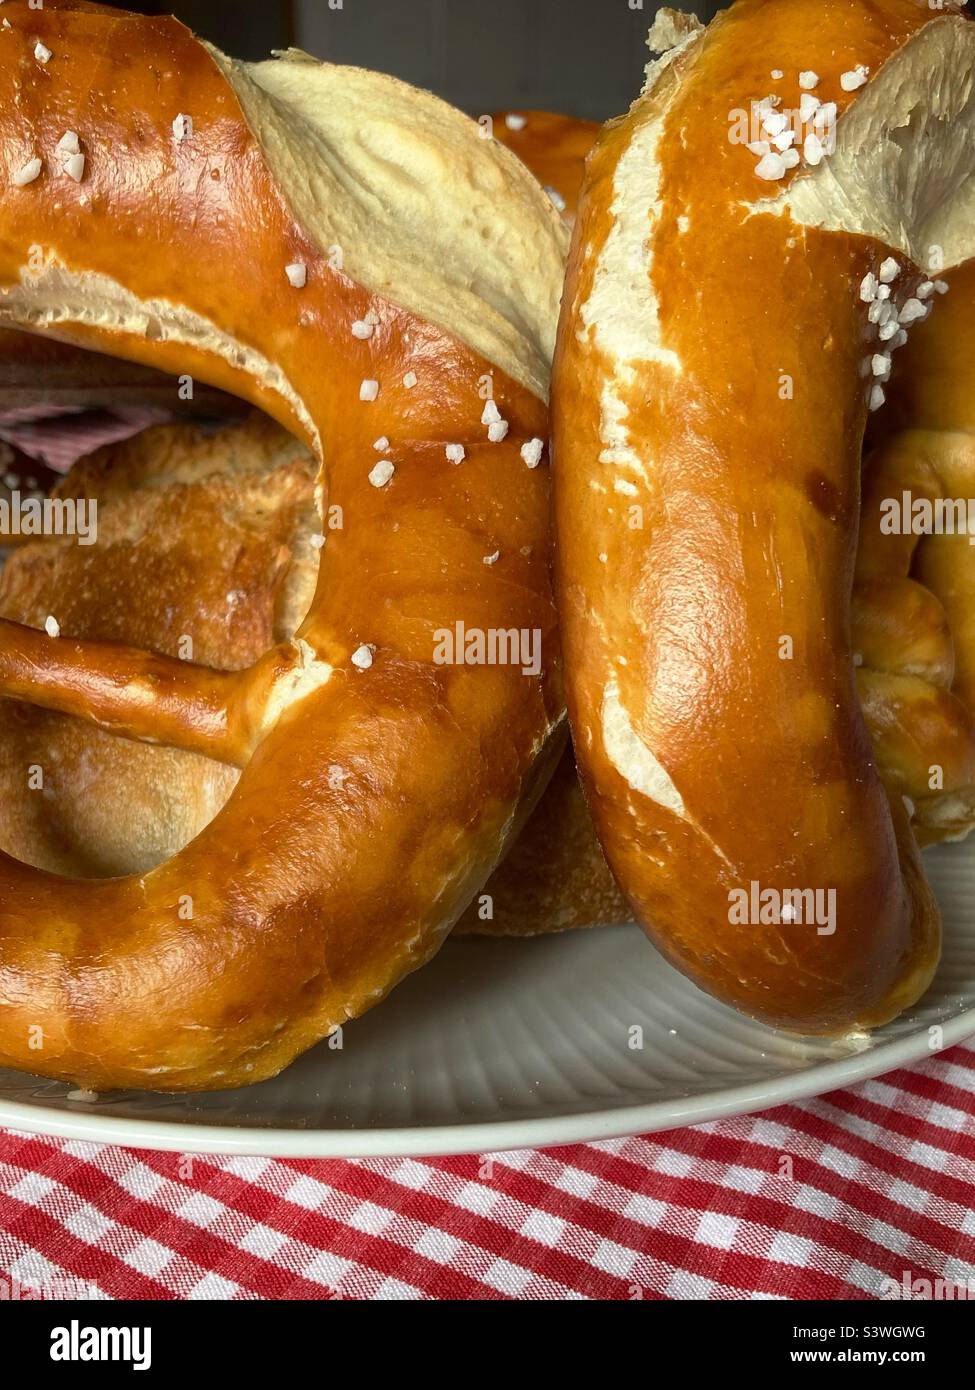 Pretzels on a plate on a checkered Table cloth Stock Photo